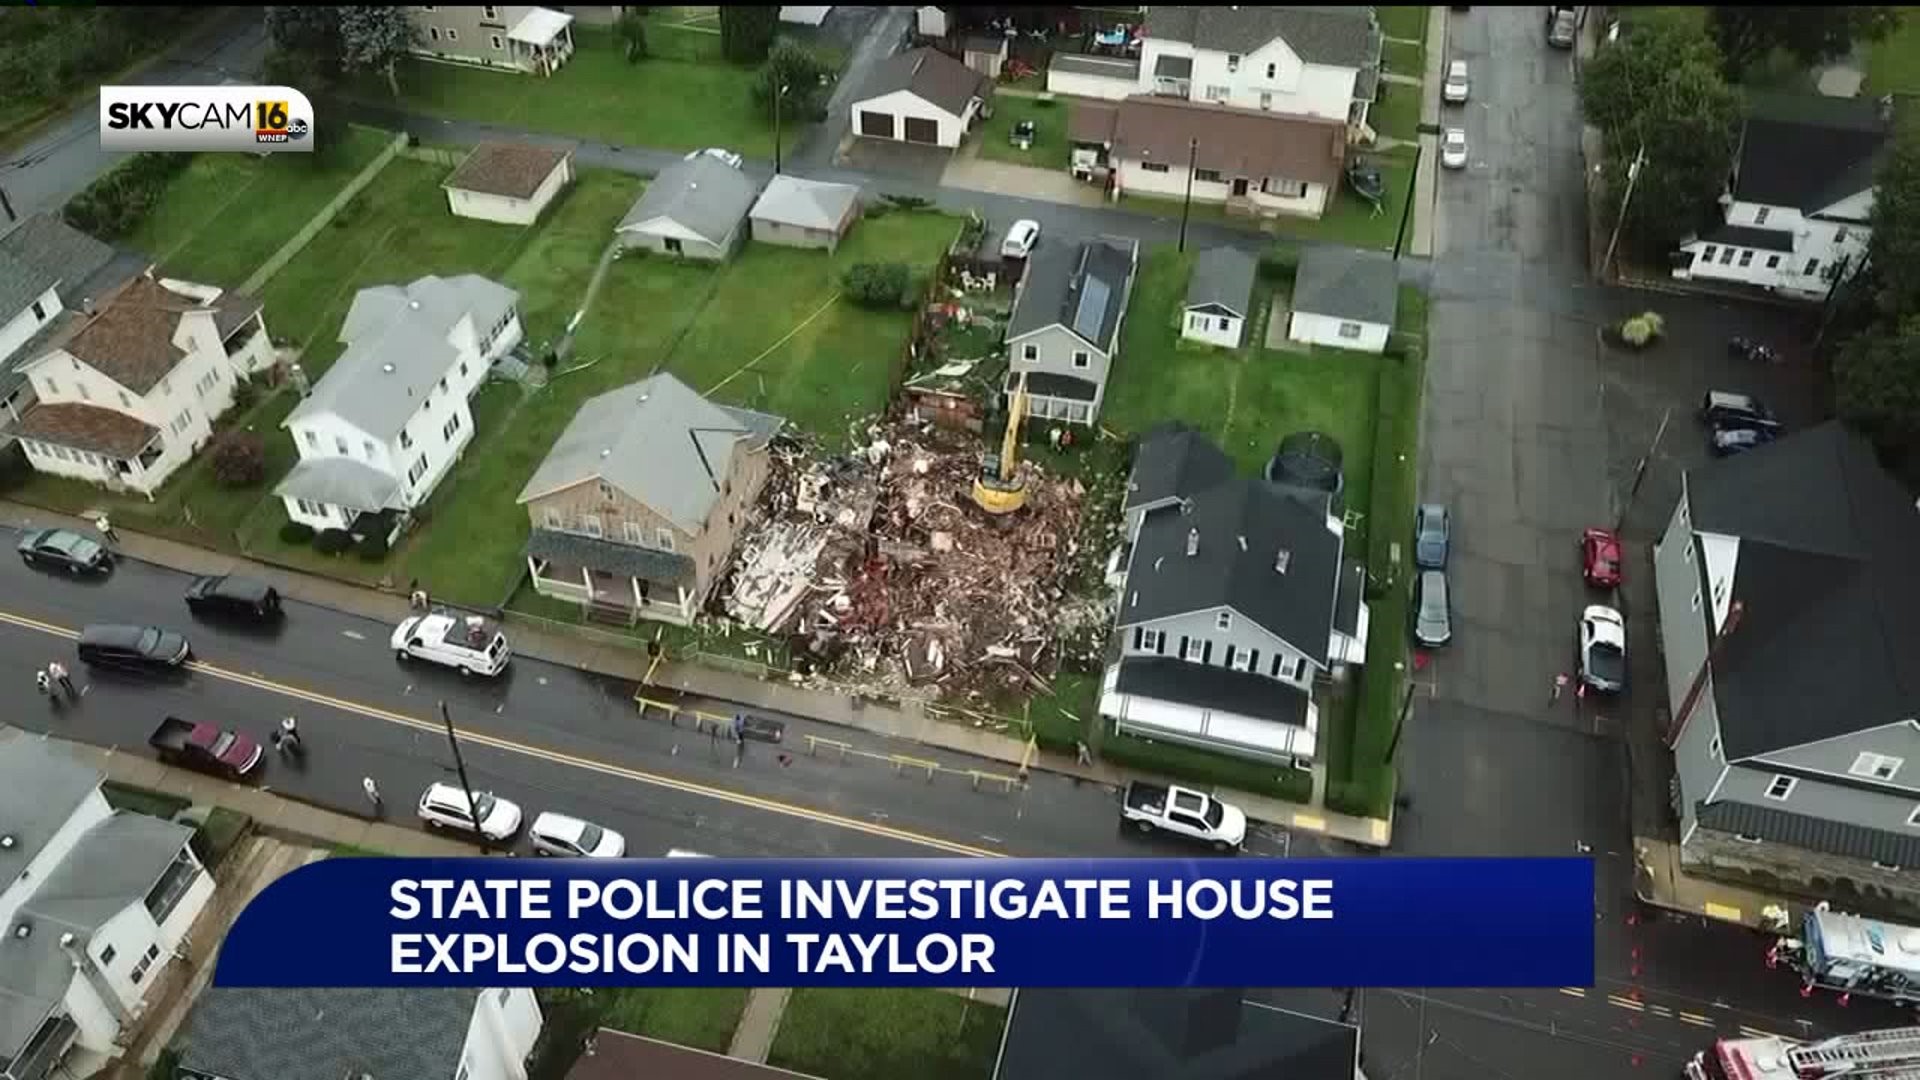 `I thought the end of the world was coming` - Neighbors React To Taylor House Explosion